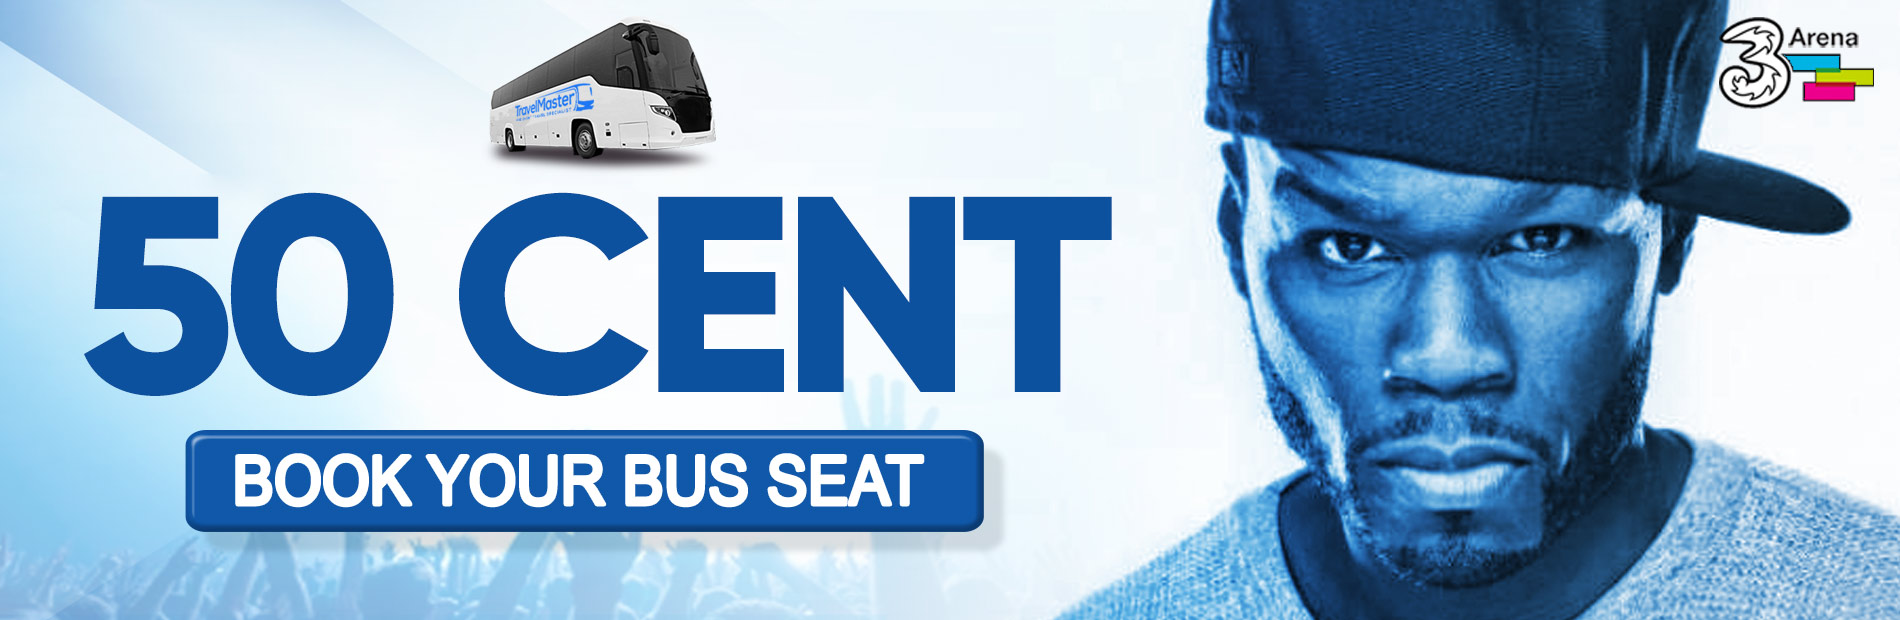 Bus to 50 Cent 3Arena Dublin